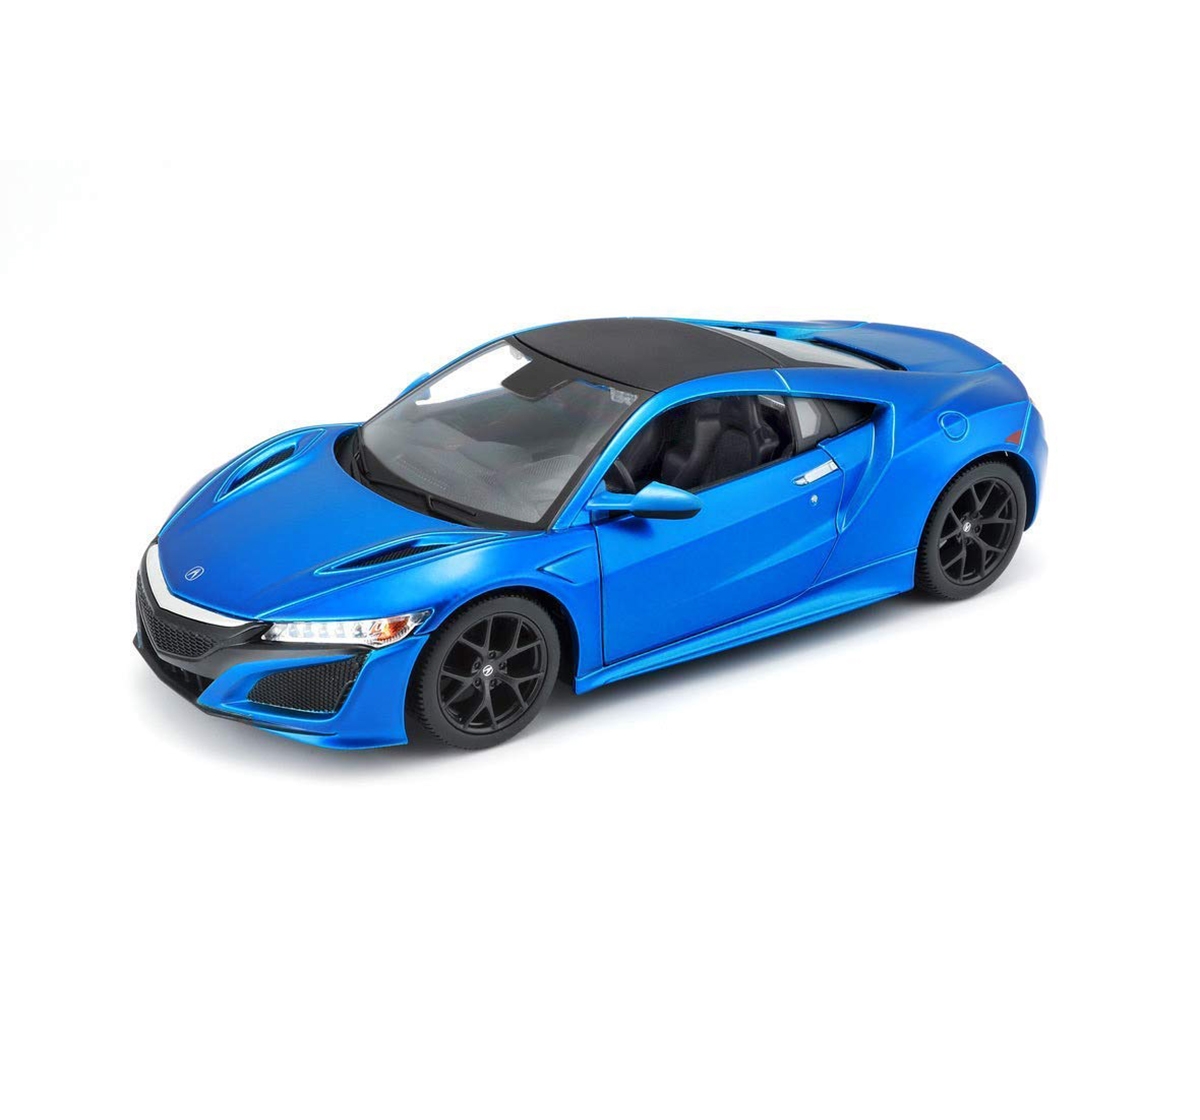 Msz | MSZ 1:31 Honda Acura NSX Car with Light and Sound for Kids age 3Y+ (Blue) 4